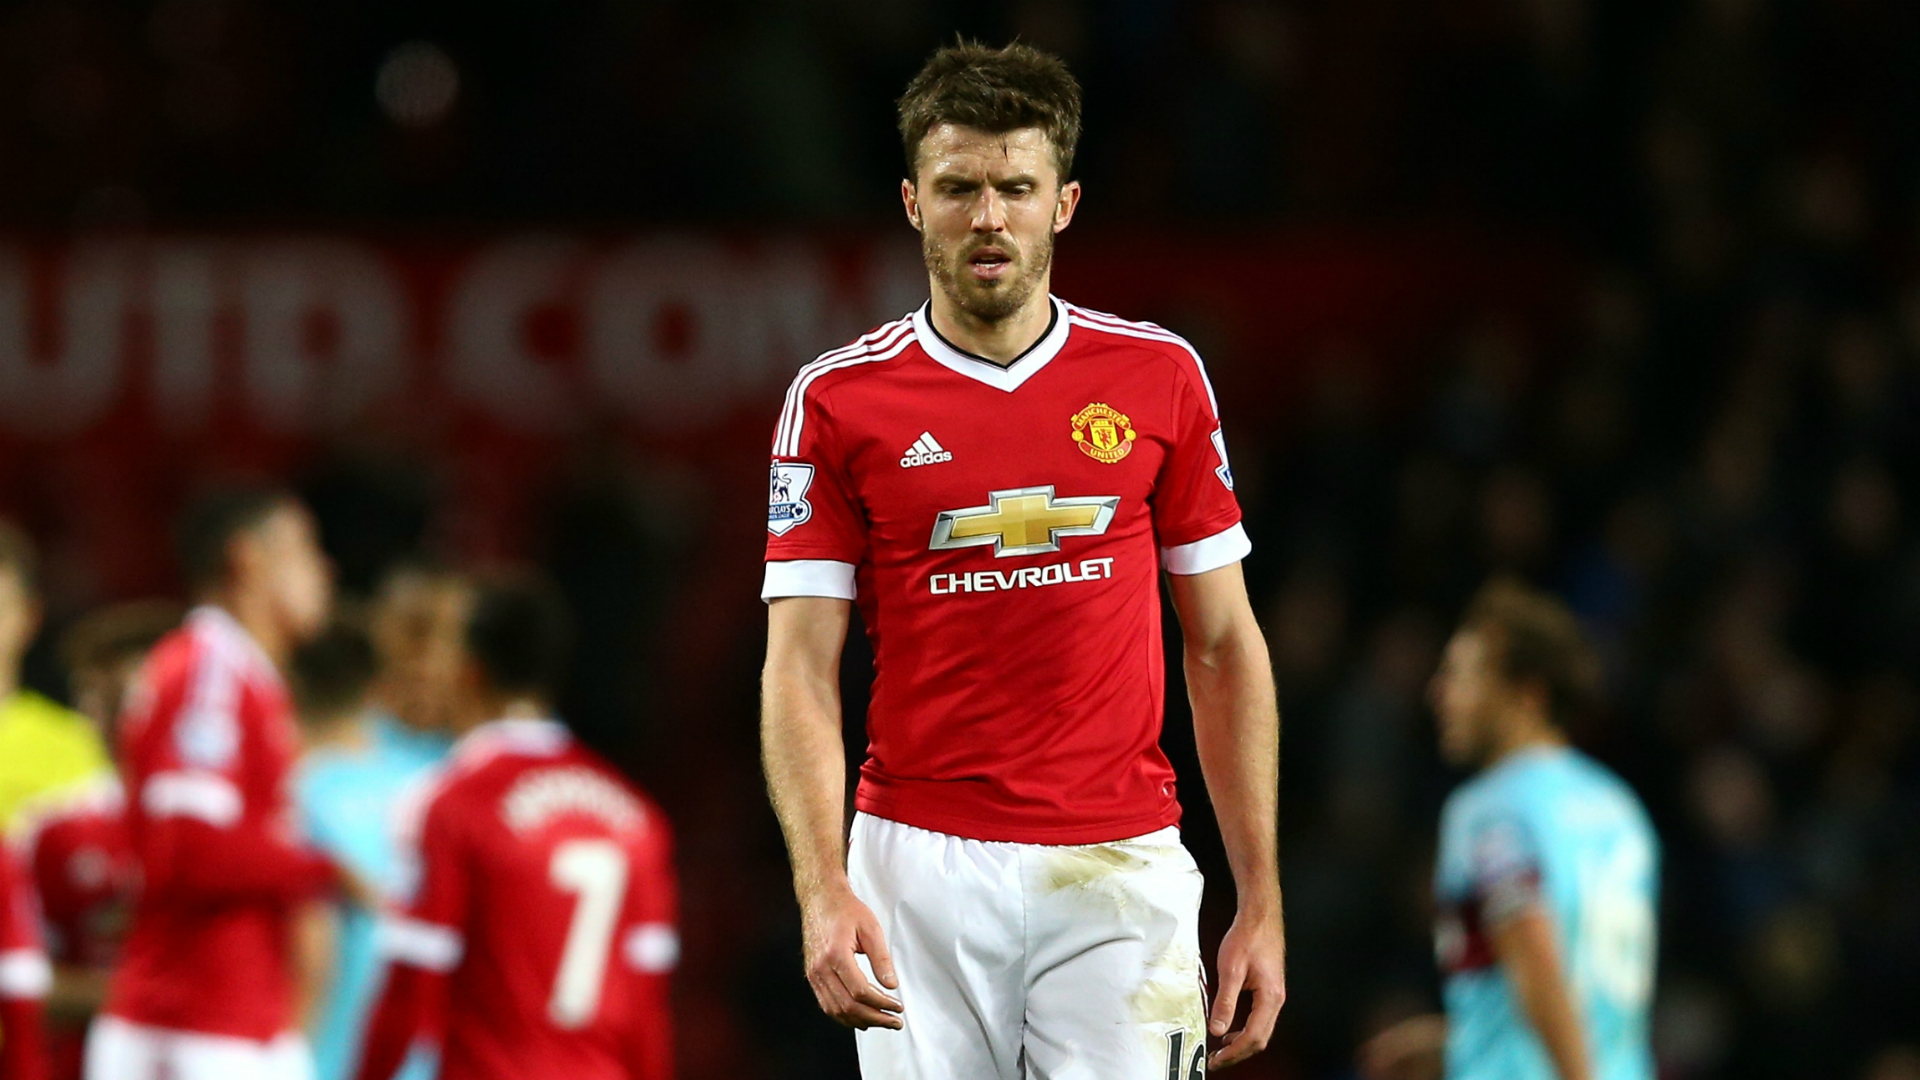 Carrick Manchester United Players Are Fighting For Van